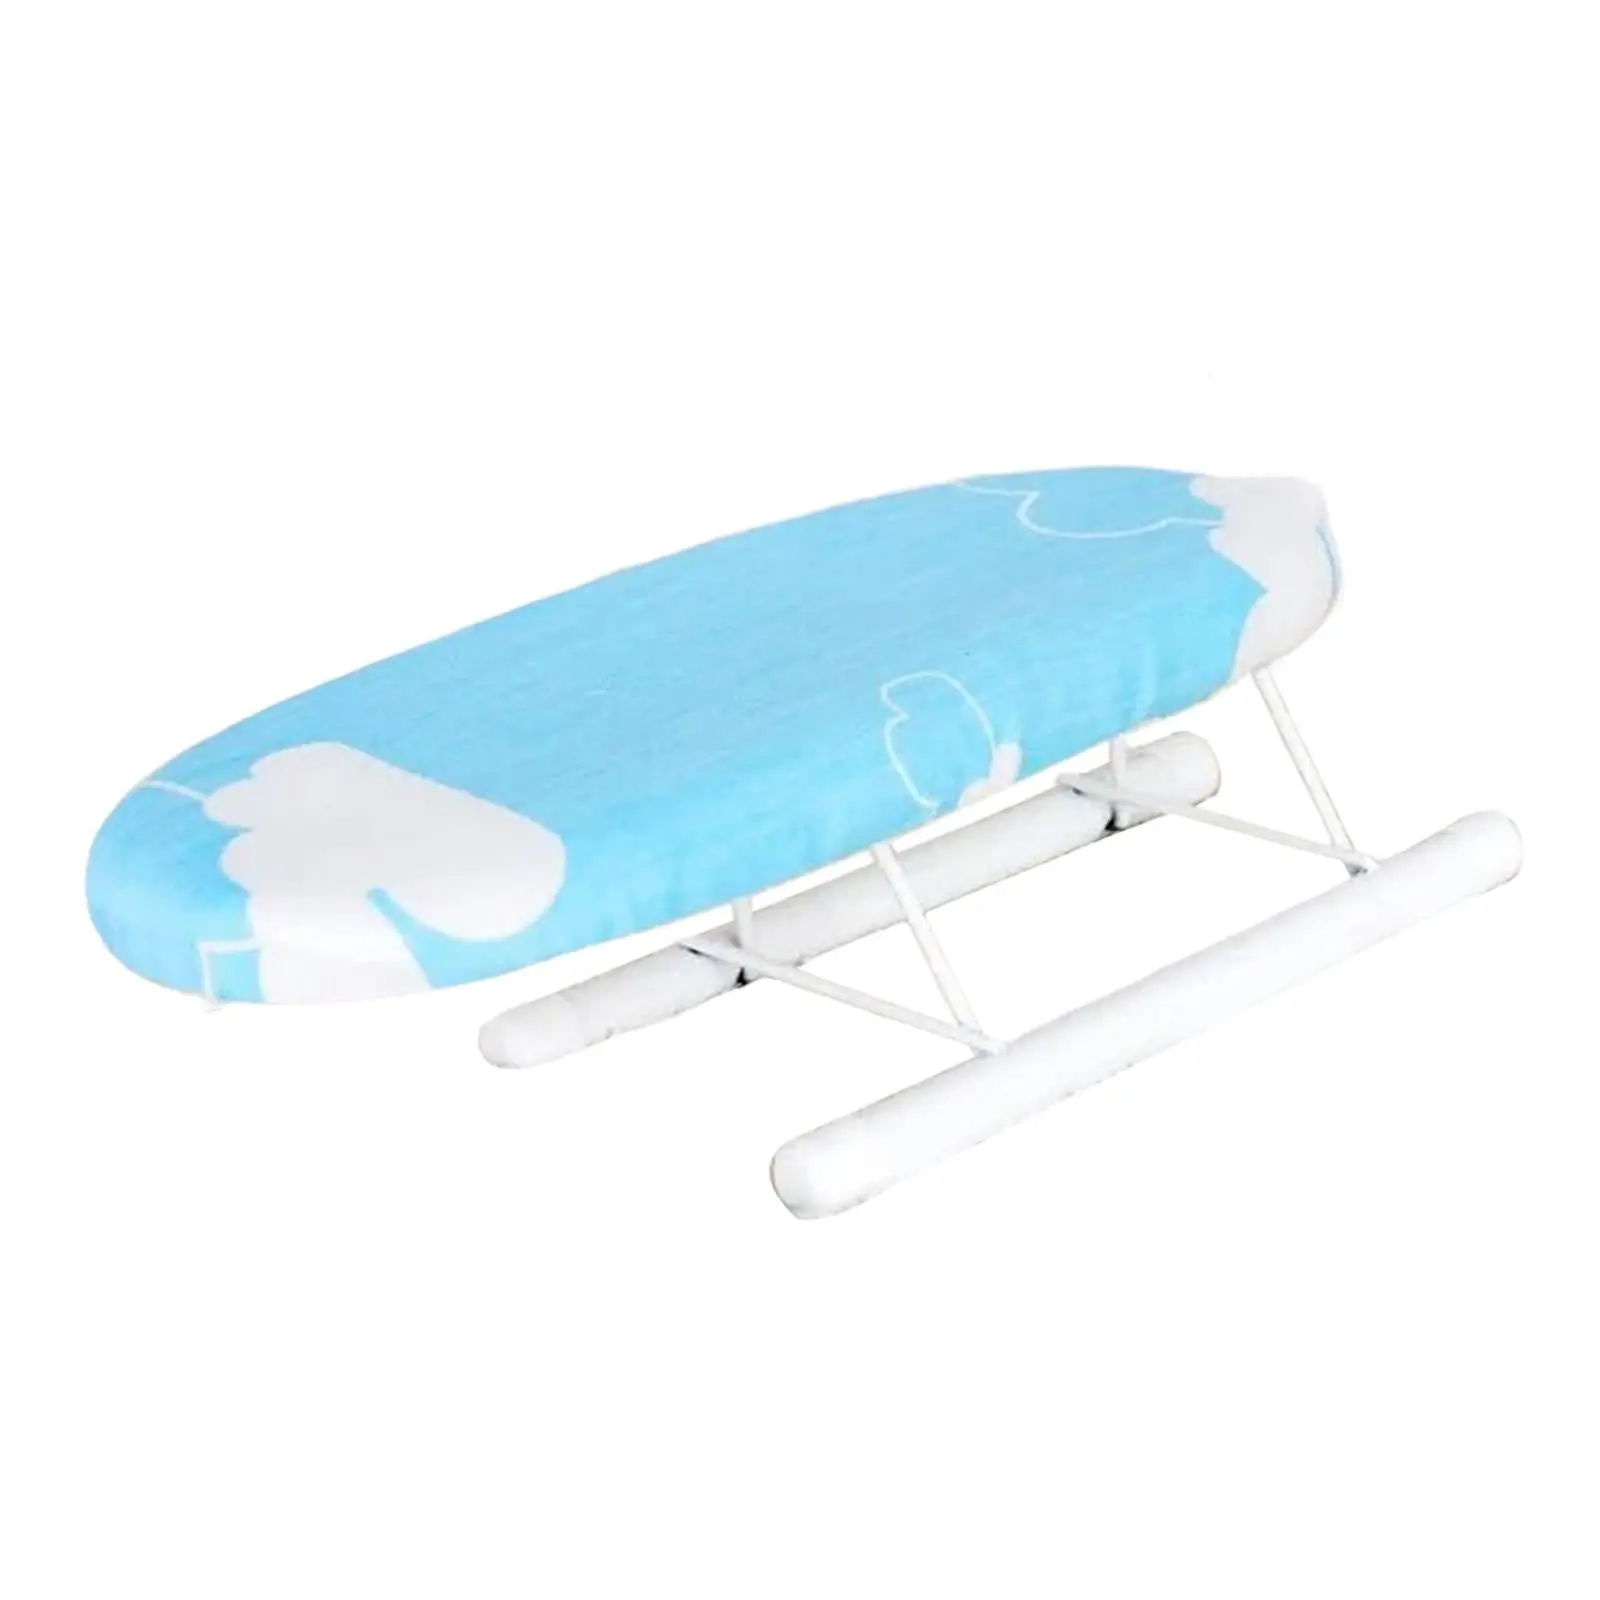 Mini Ironing Board Foldable Washable Sleeve Cuffs Collars Removable for Travel Laundry Sewing Room Dorm Household